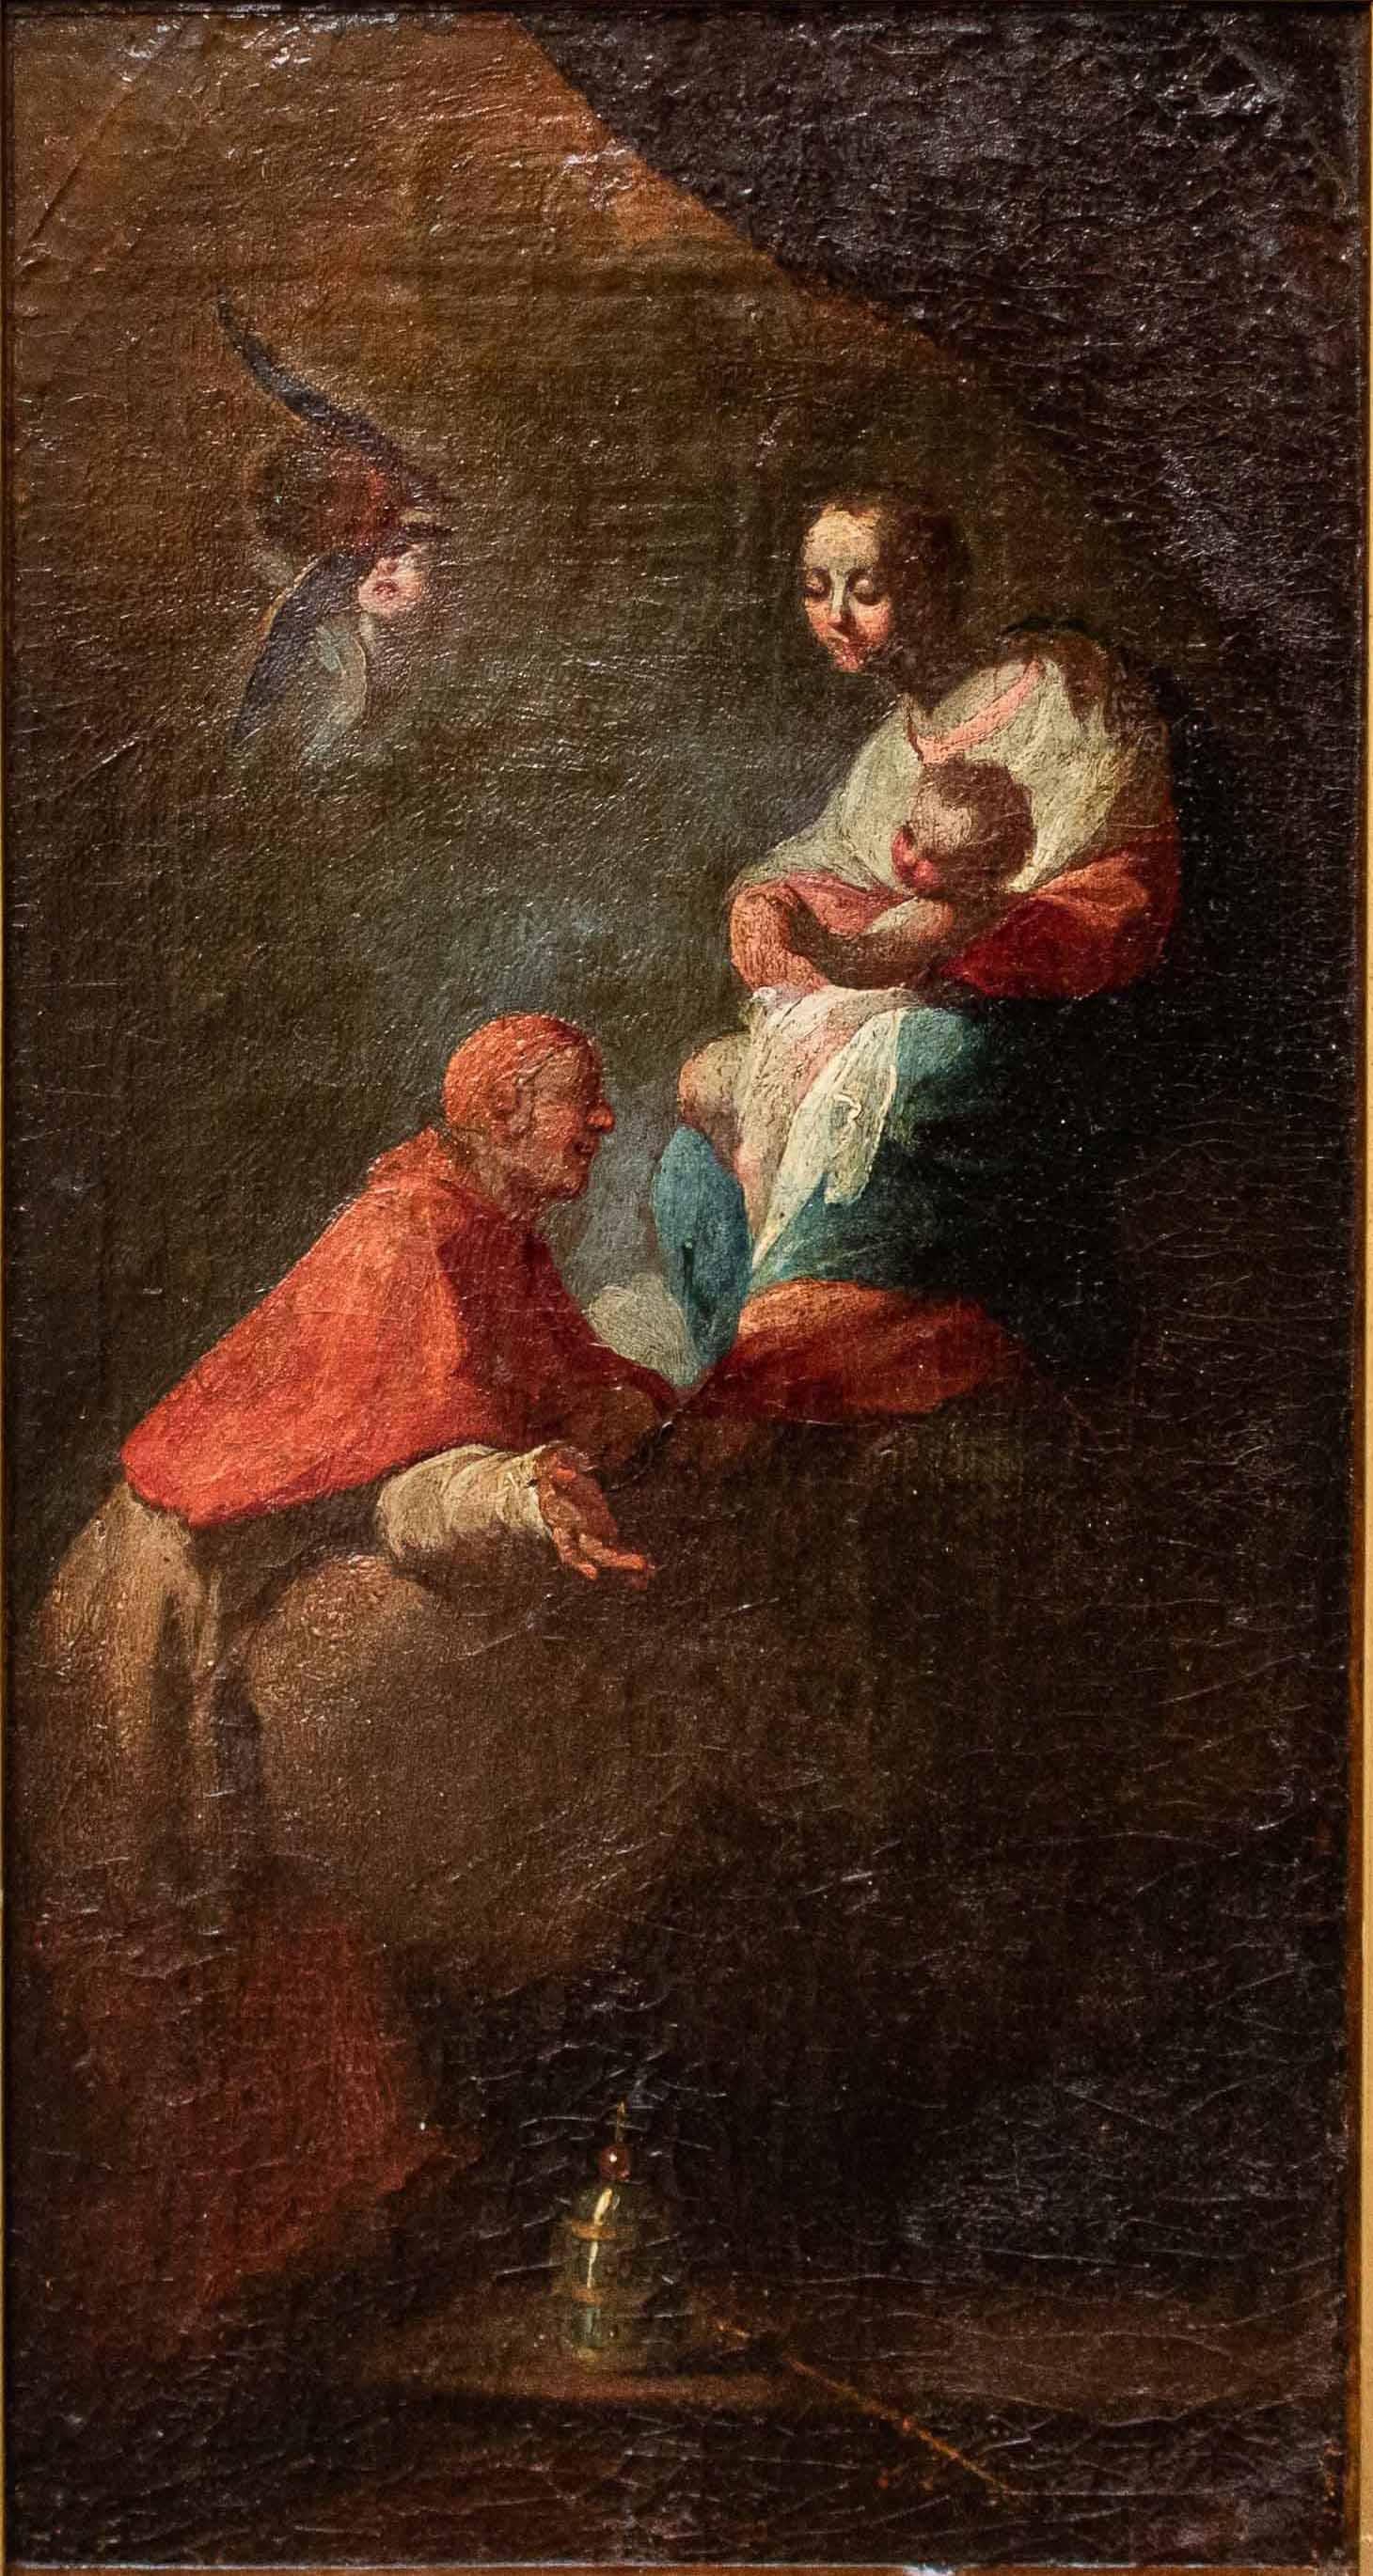 Oiled 18th Century Madonna with Child Adored by Two Saints Paintings Oil on Canvas For Sale